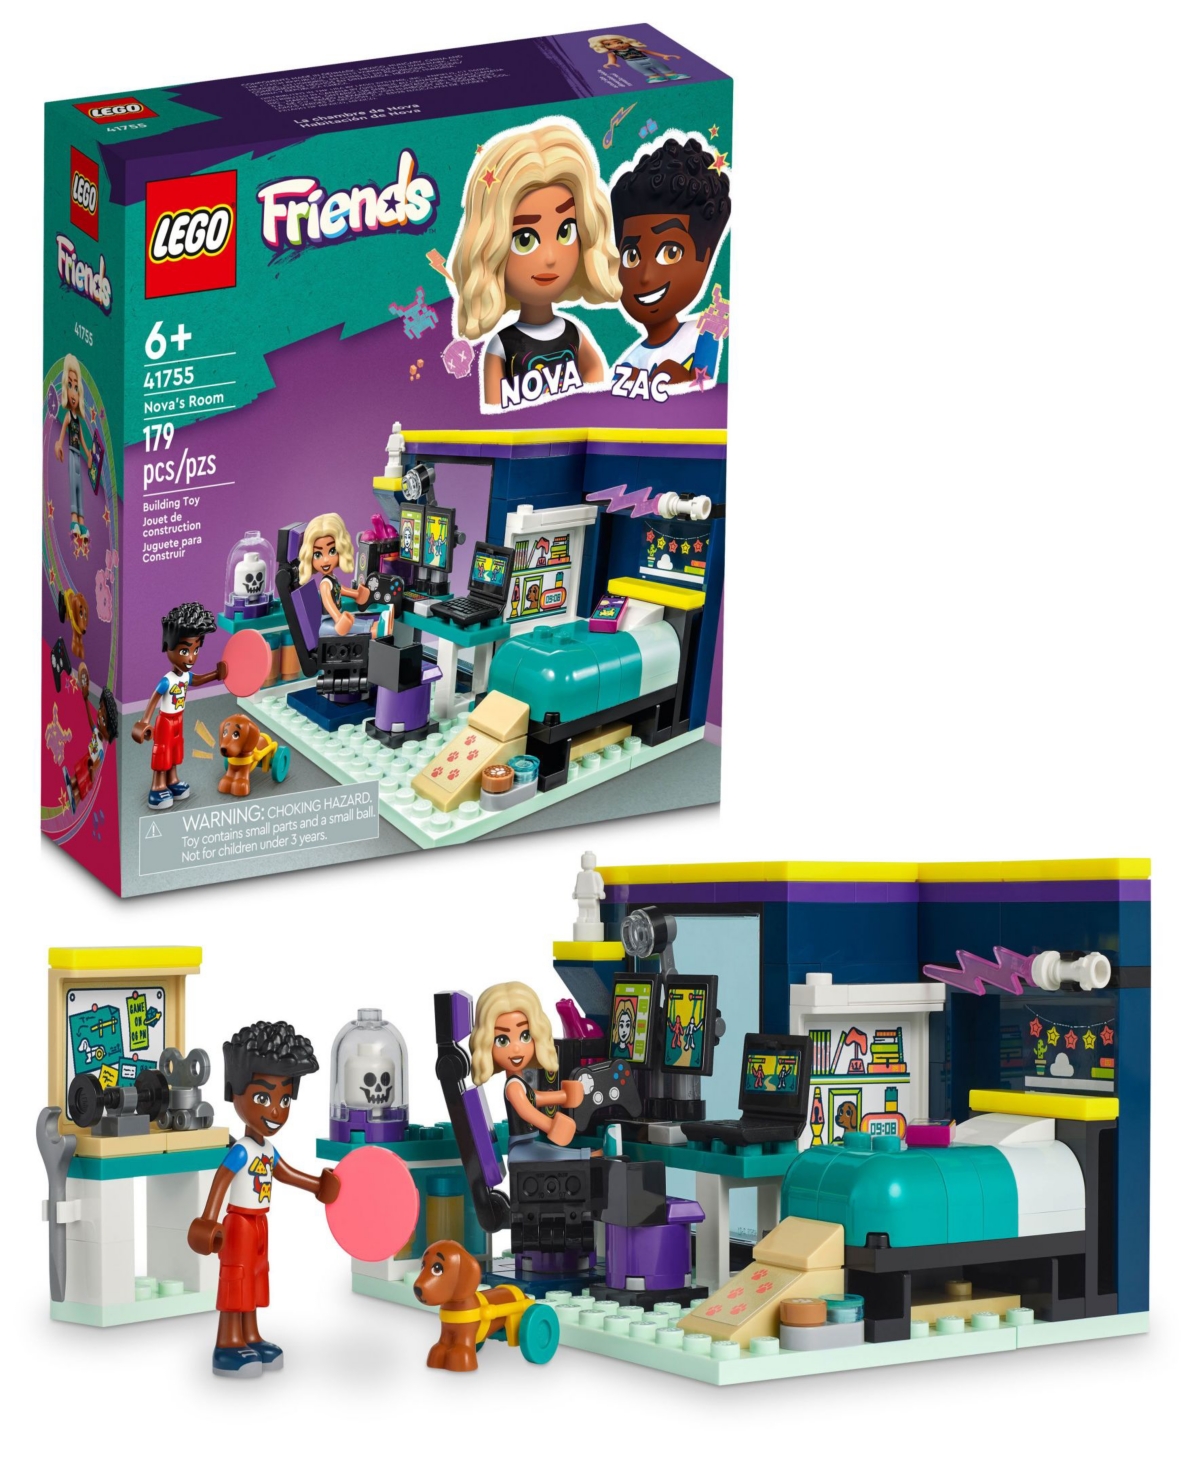 Lego Friends Nova's Room 41755 Toy Building Set With Nova, Zac And Dog Figures In Multicolor